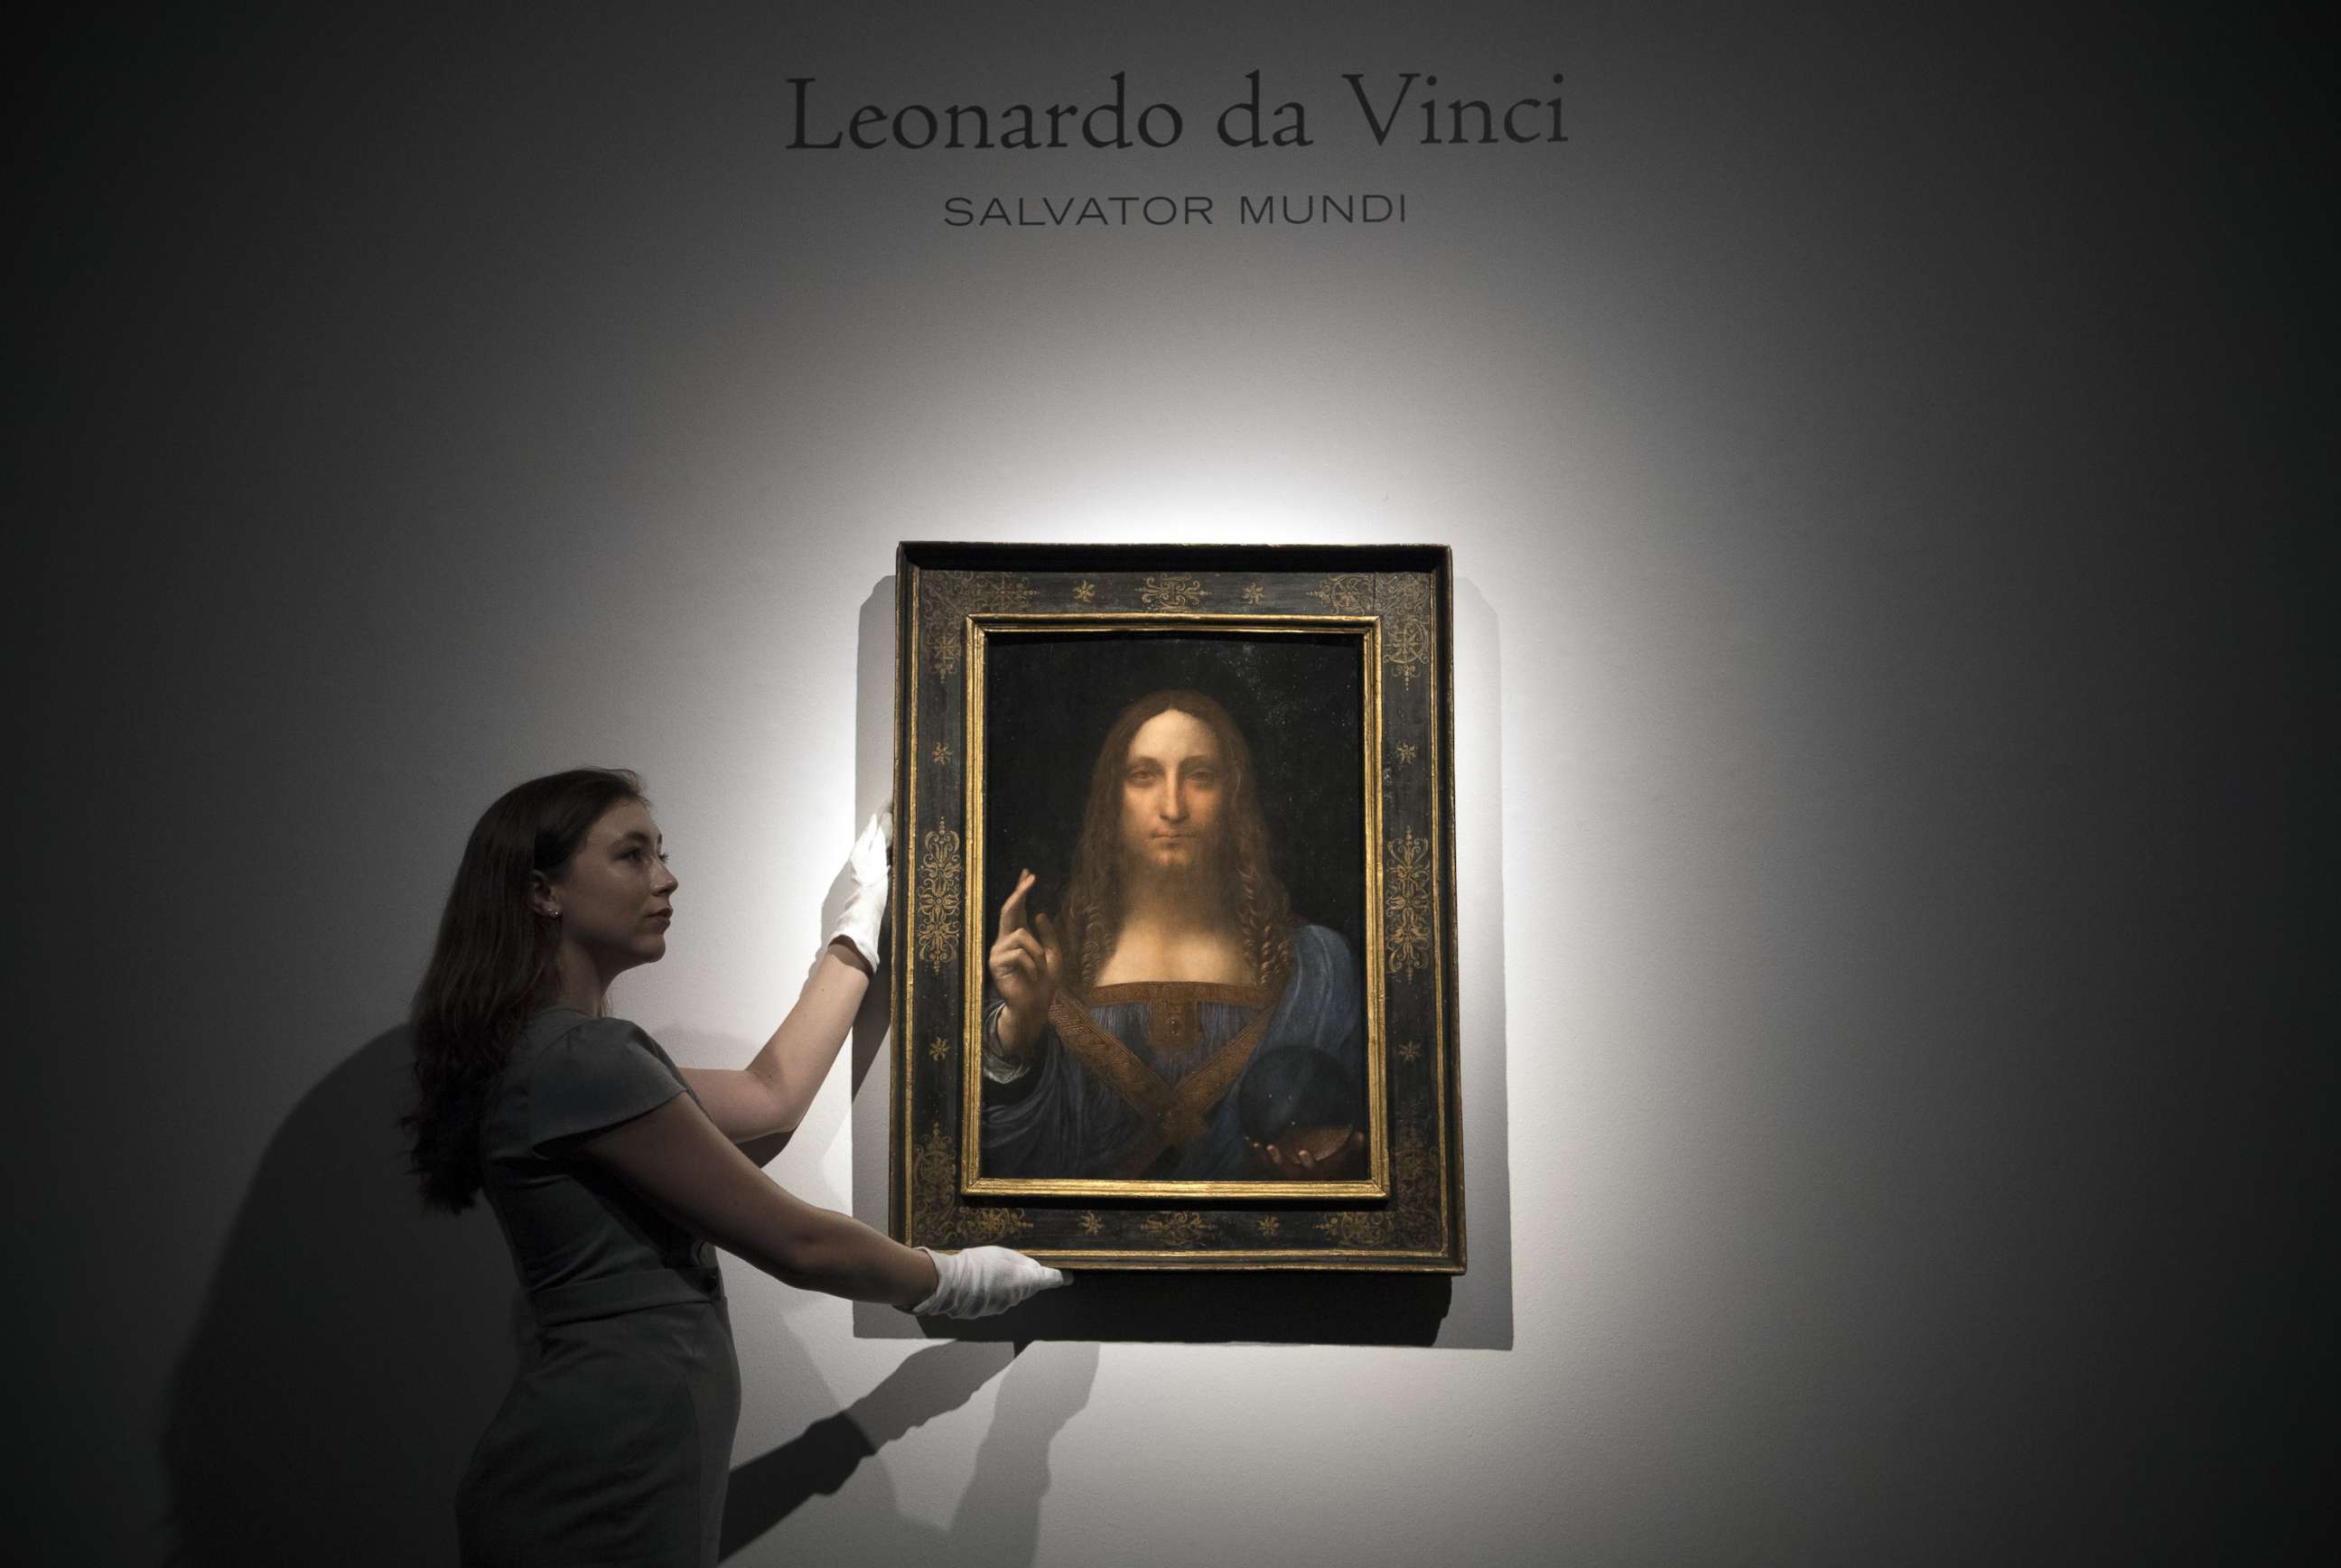 PHOTO: A staff member poses with a painting by Leonardo da Vinci entitled 'Salvator Mundi' in London on OCt. 24, 2017, before it is auctioned in New York. The painting is the last privately owned Da Vinci and is expected to fetch around $100,000,000. 